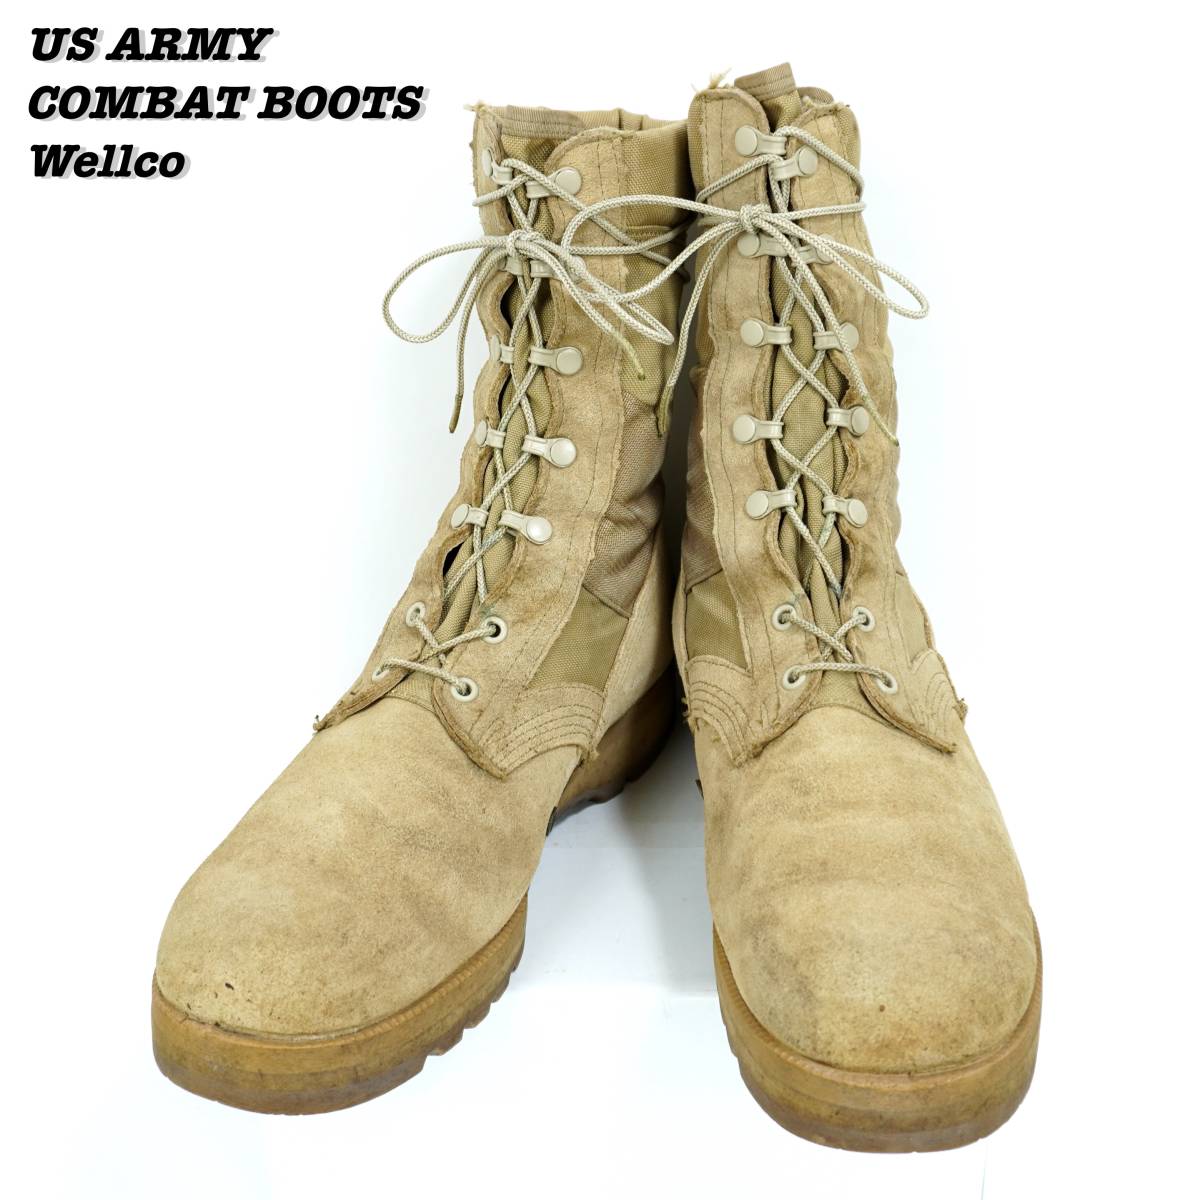 US ARMY HOT WEATHER ARMY COMBAT BOOTS COYOTE 10 5 アメリカ軍